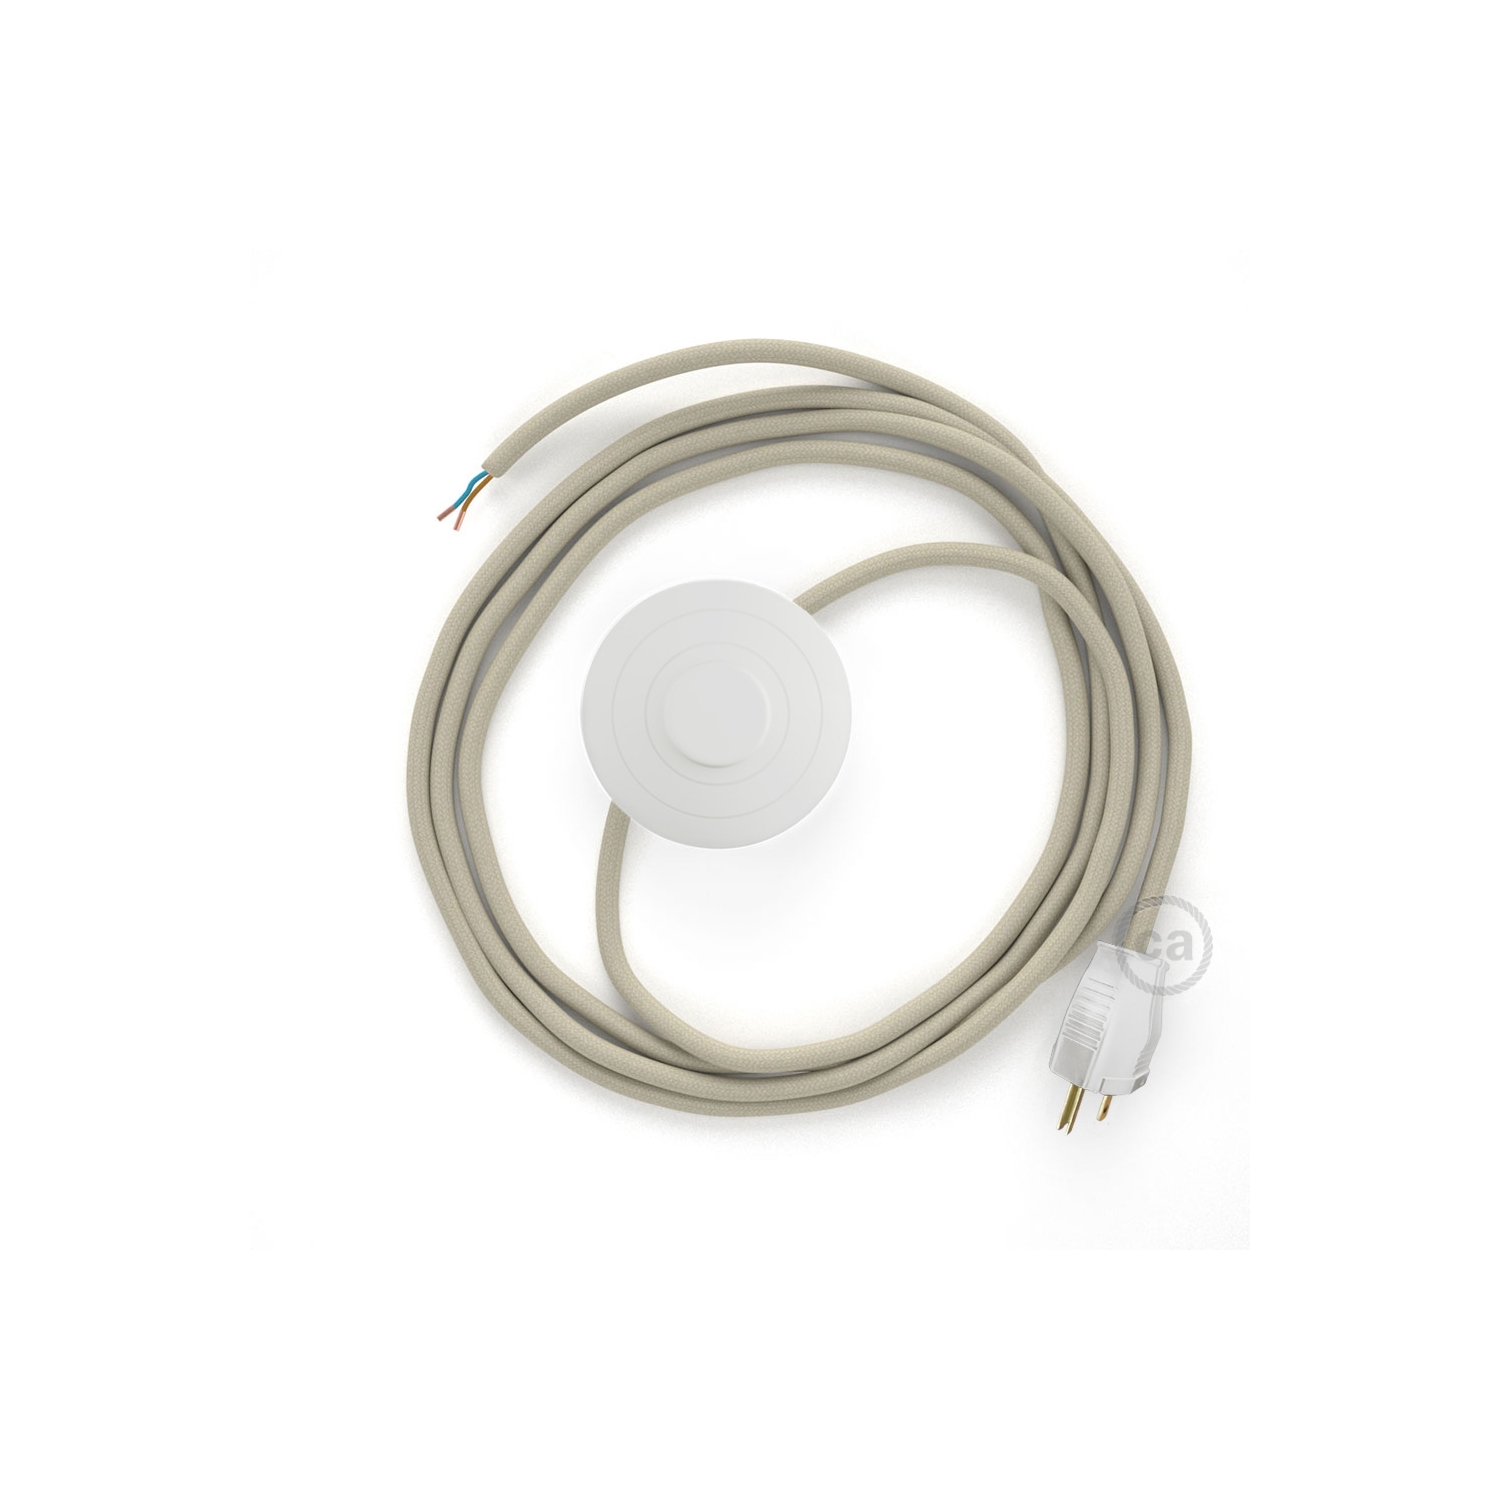 Power Cord with foot switch, RC43 Dove Cotton - Choose color of switch/plug